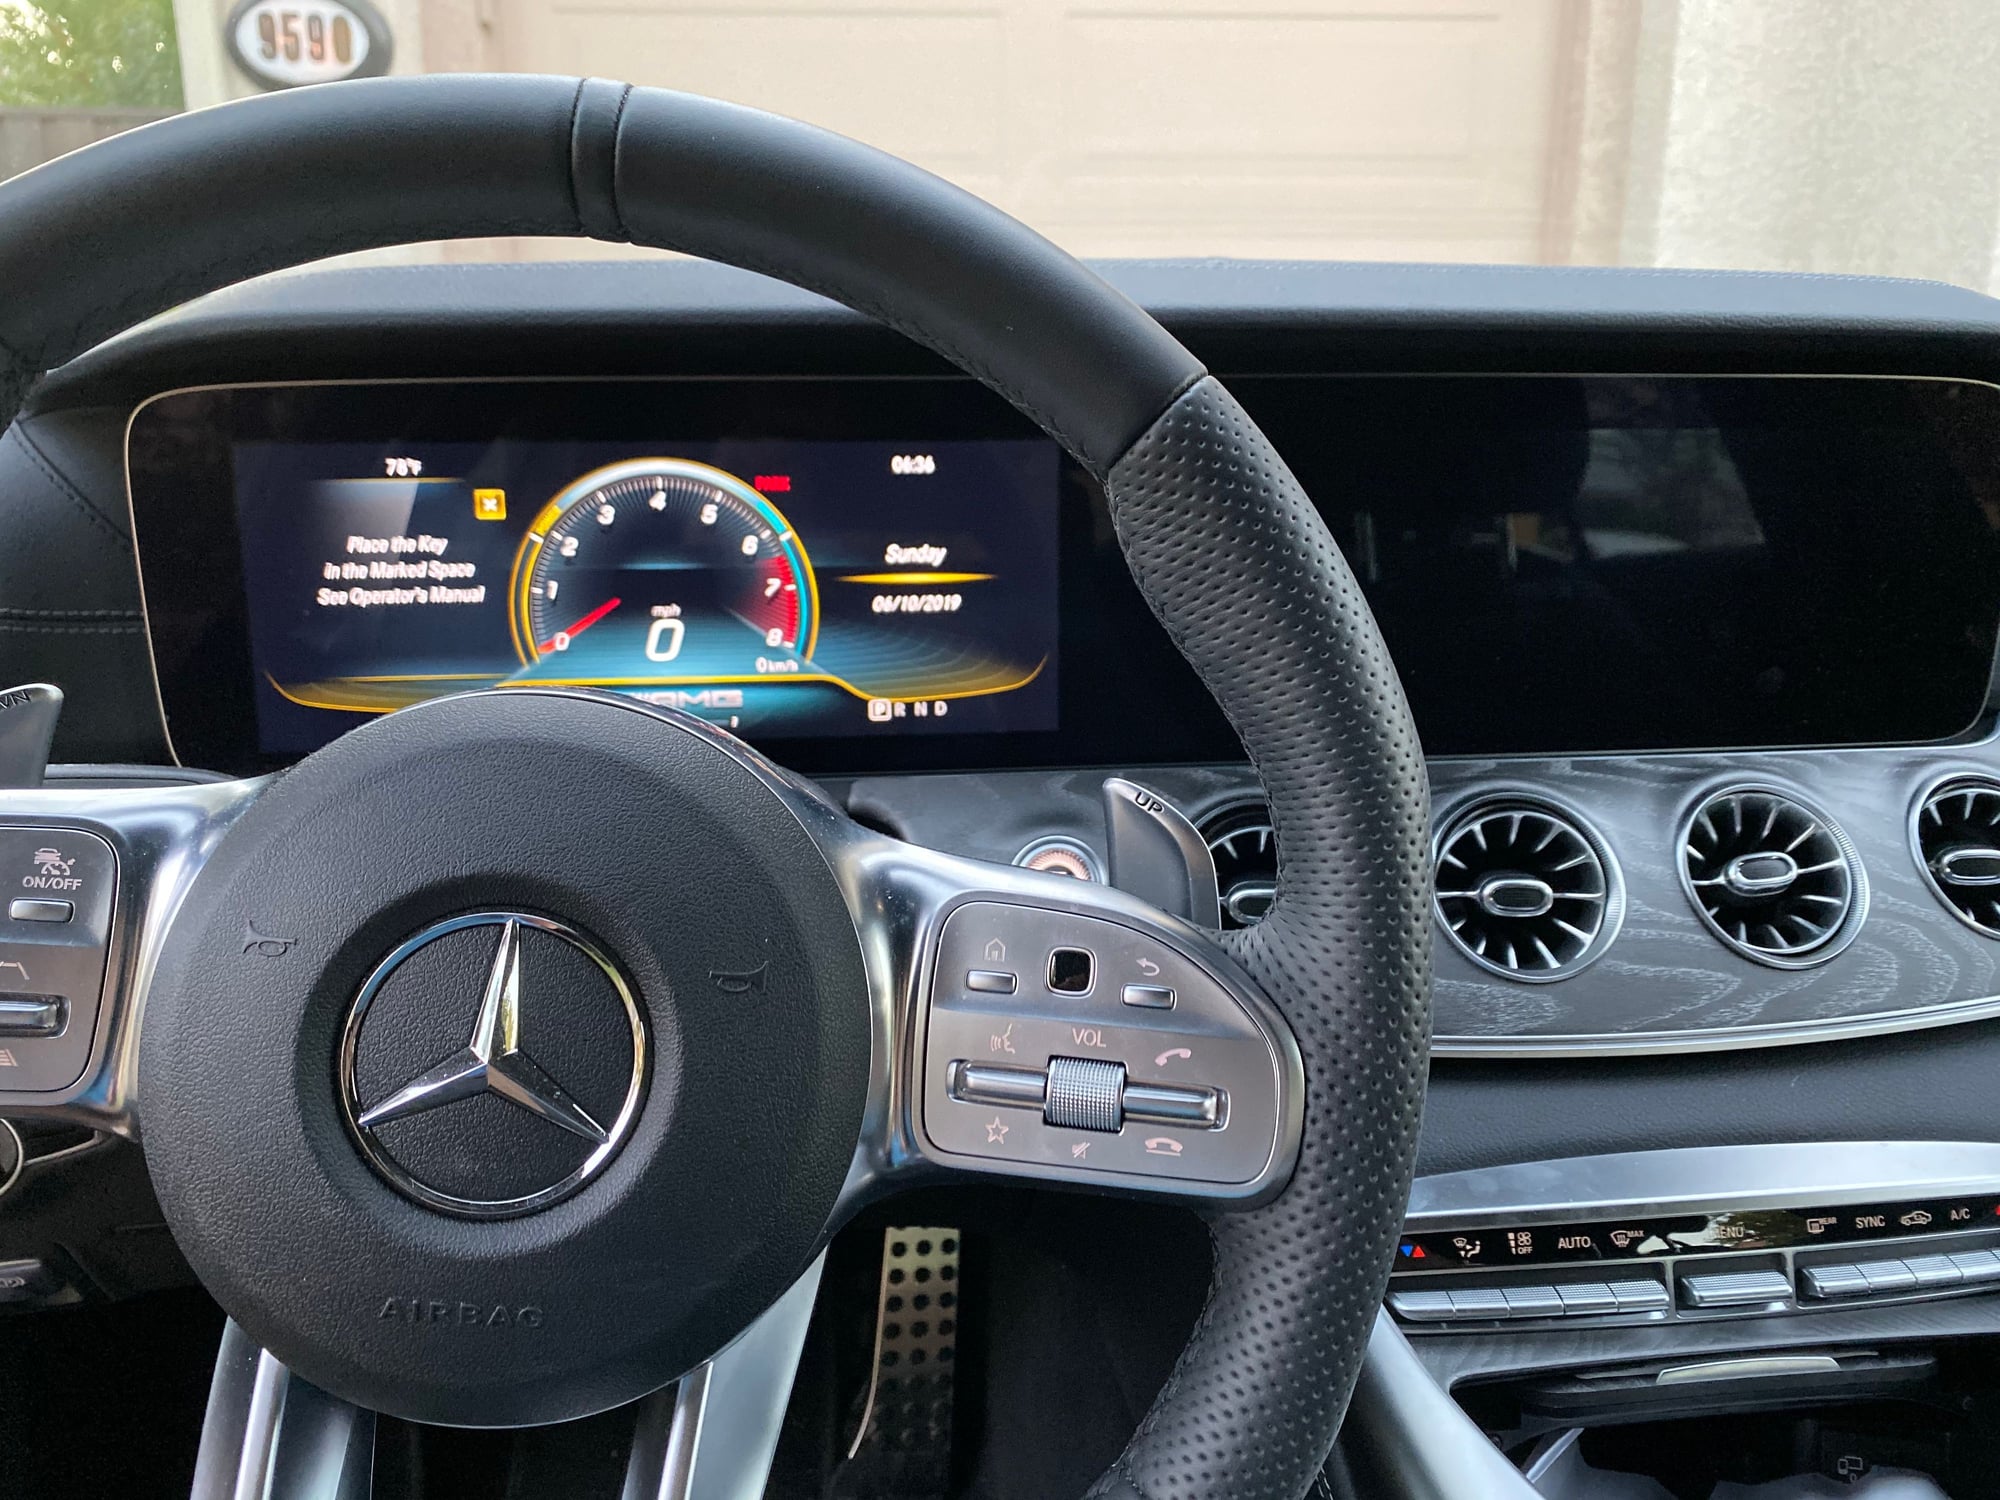 2019 Mercedes-Benz AMG GT 53 - 2019 AMG GT 53 for Lease Trade - 1850/mo all taxes included, 0 down, +incentive! - New - VIN WDD7X6BB9KA003784 - 3,150 Miles - 6 cyl - AWD - Automatic - Coupe - Gray - Roseville, CA 95747, United States